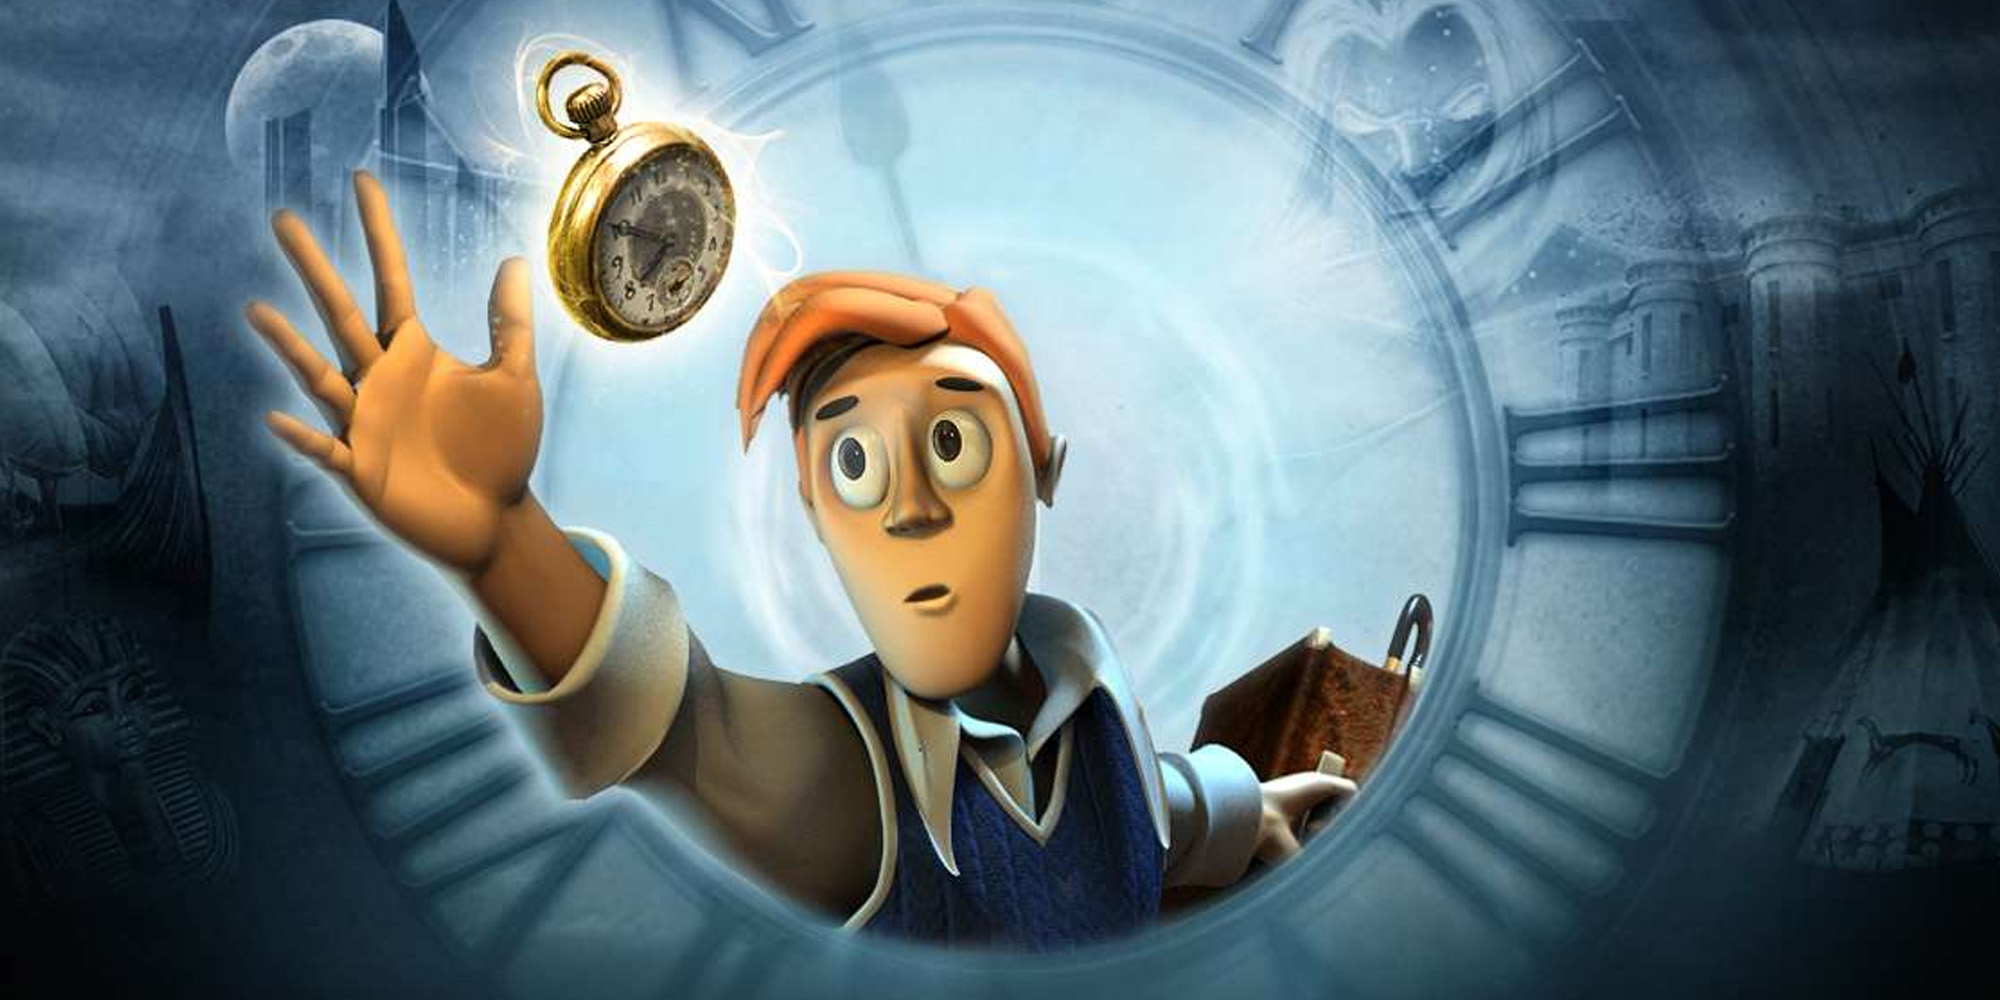 Mortimer Beckett and the Time Paradox